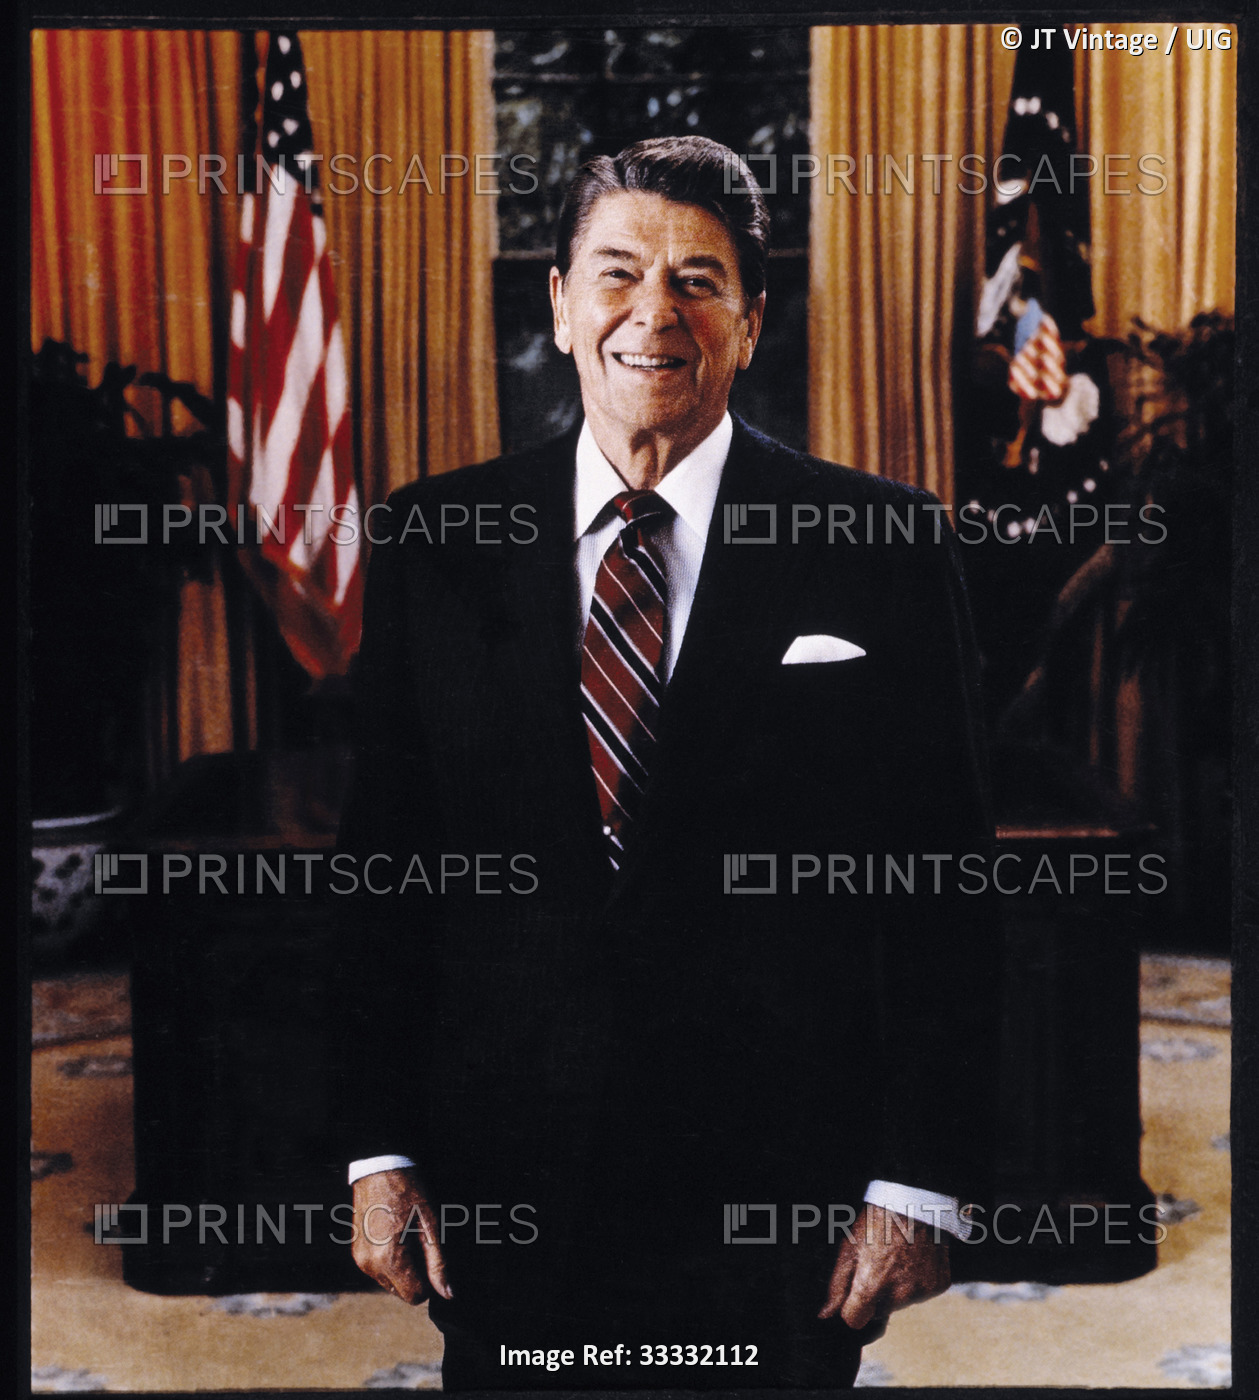 Ronald Reagan (1911-2004), 40th President of the United States, Portrait, 1981. ...